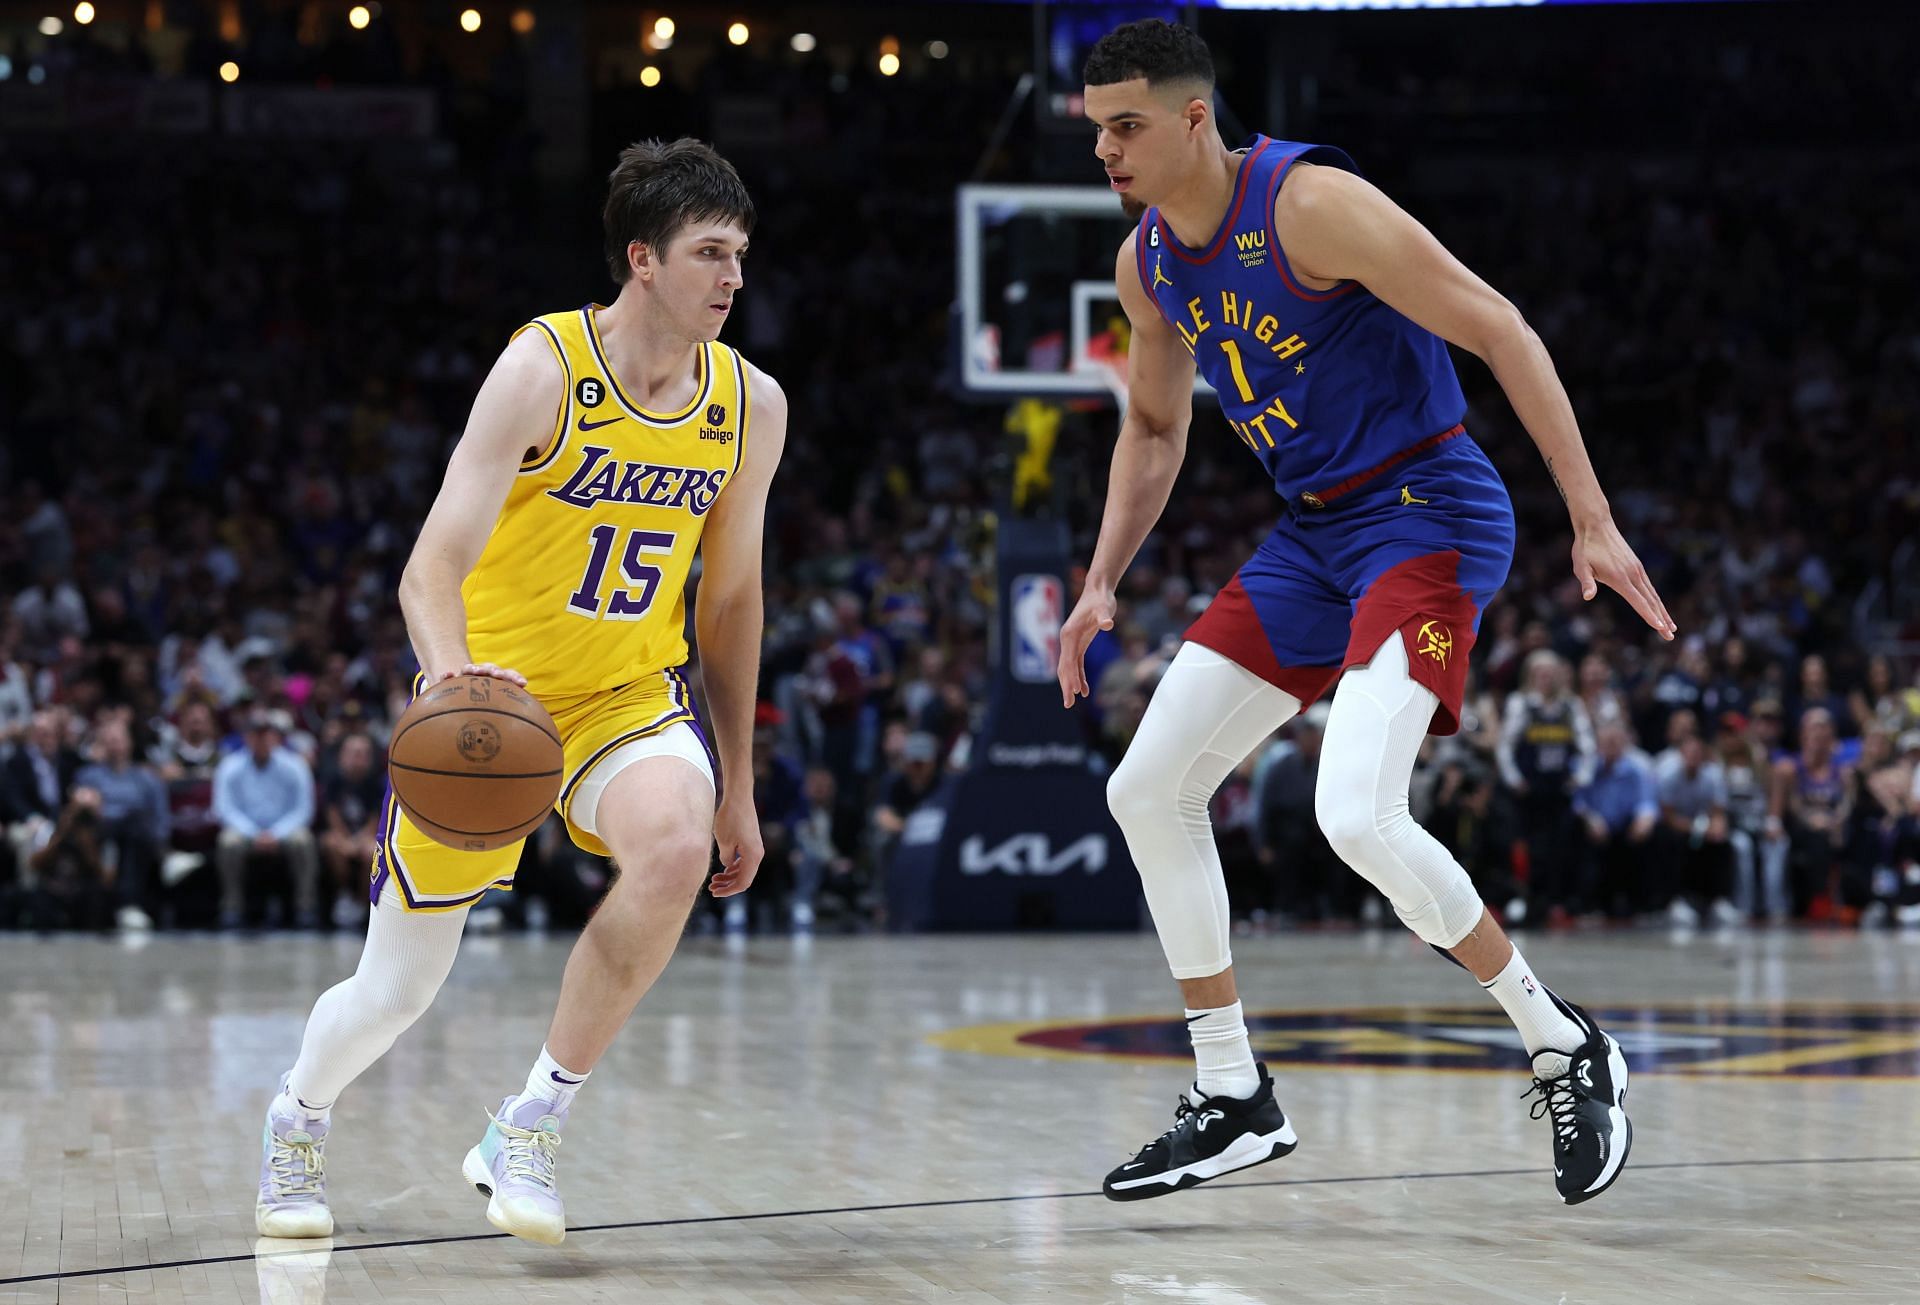 Lakers vs Nuggets prediction &amp; game preview ahead of Game 3